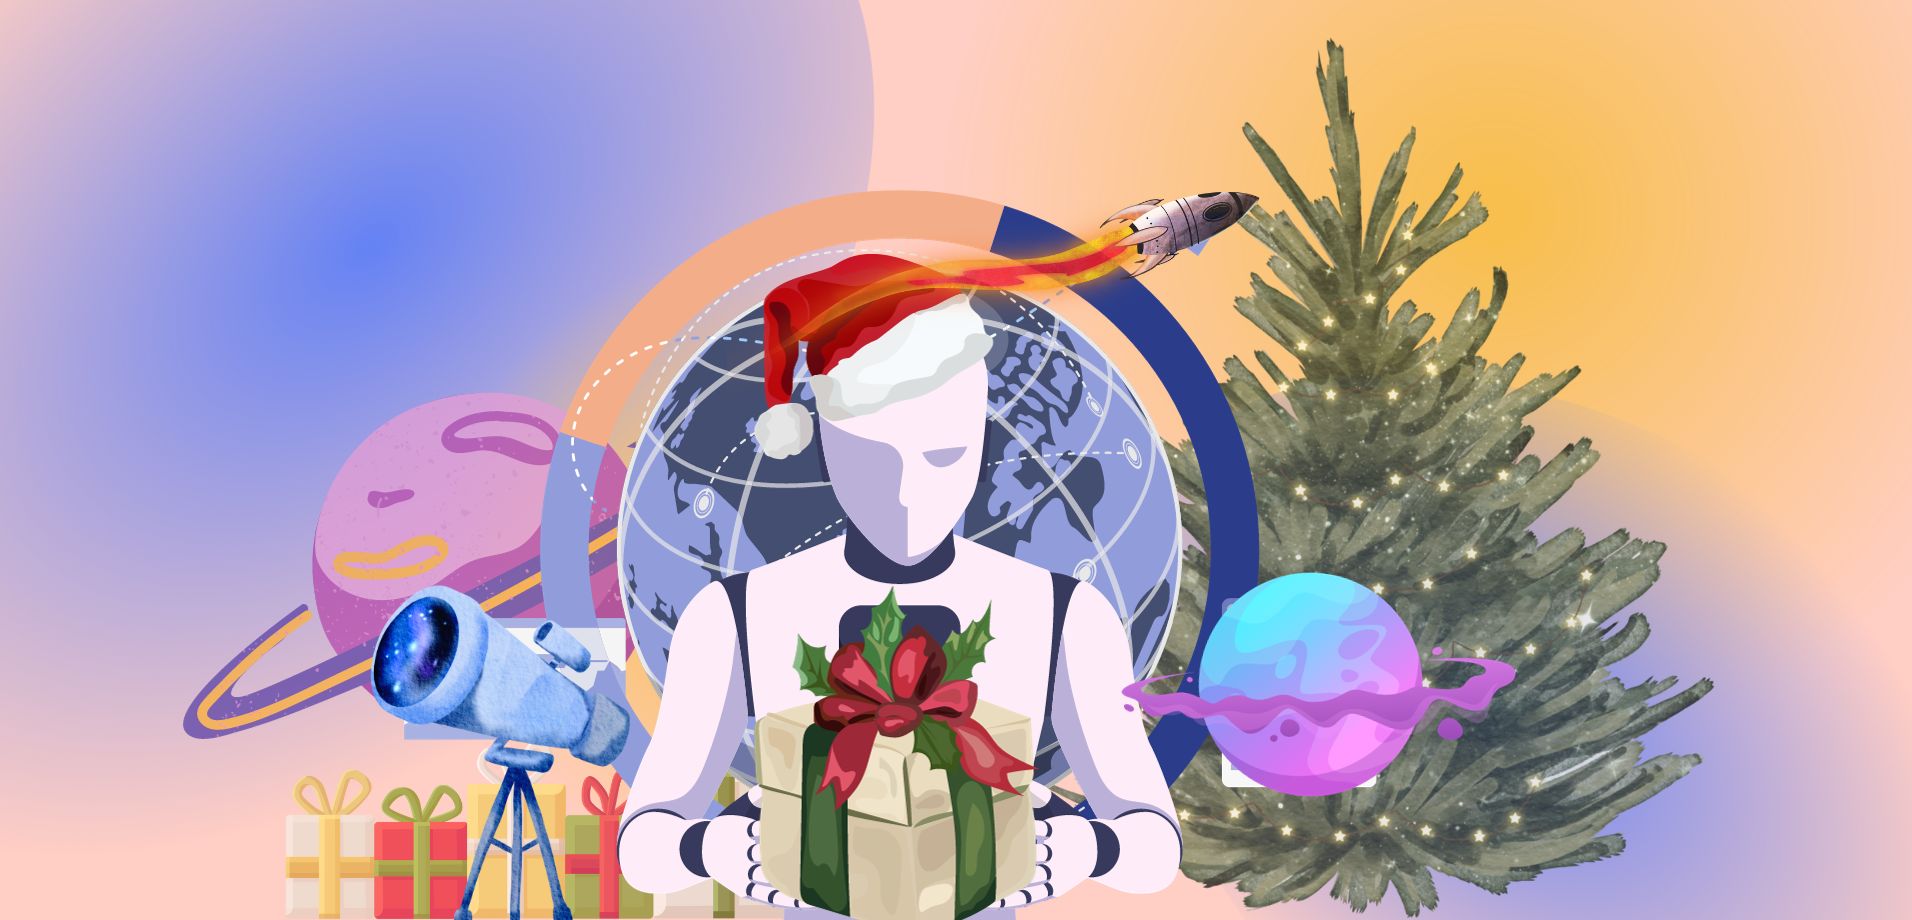 We Asked for AI Space Christmas Decoration Ideas – Here’s What We Got